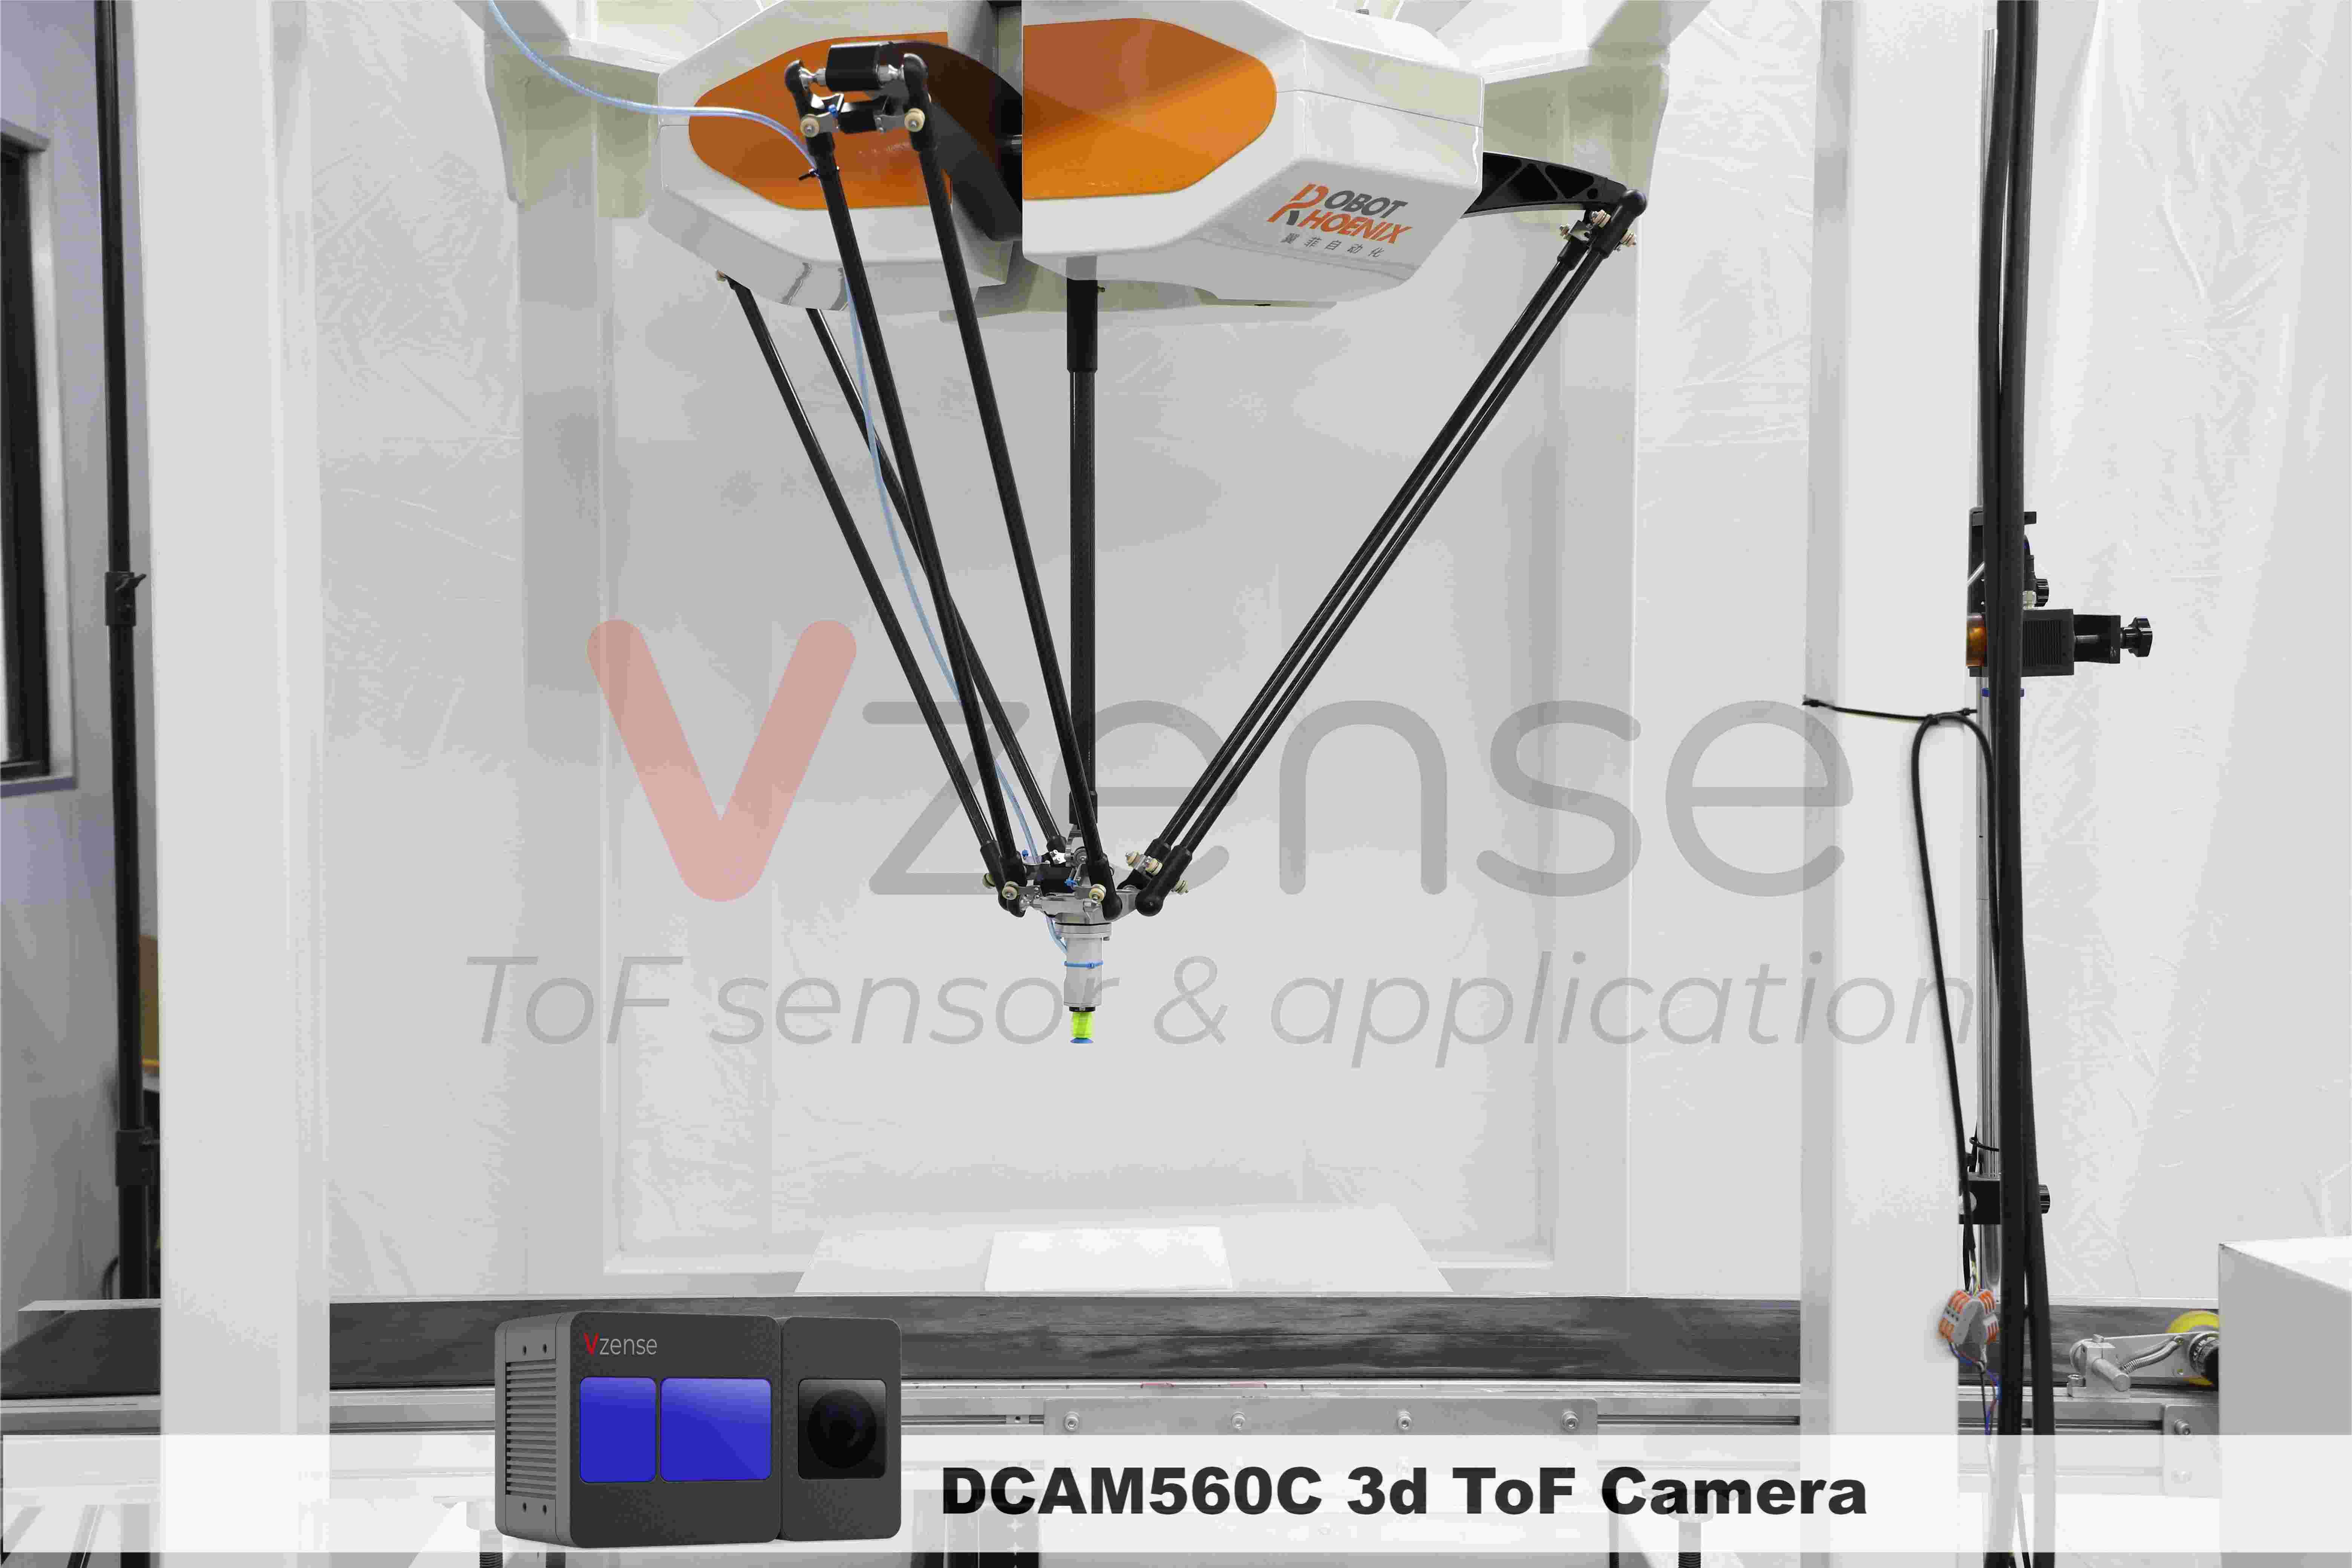 Vzense 3D-ToF-based RGB-D DS77C and DCAM560C is integrated into RobotPhoenix scara robot